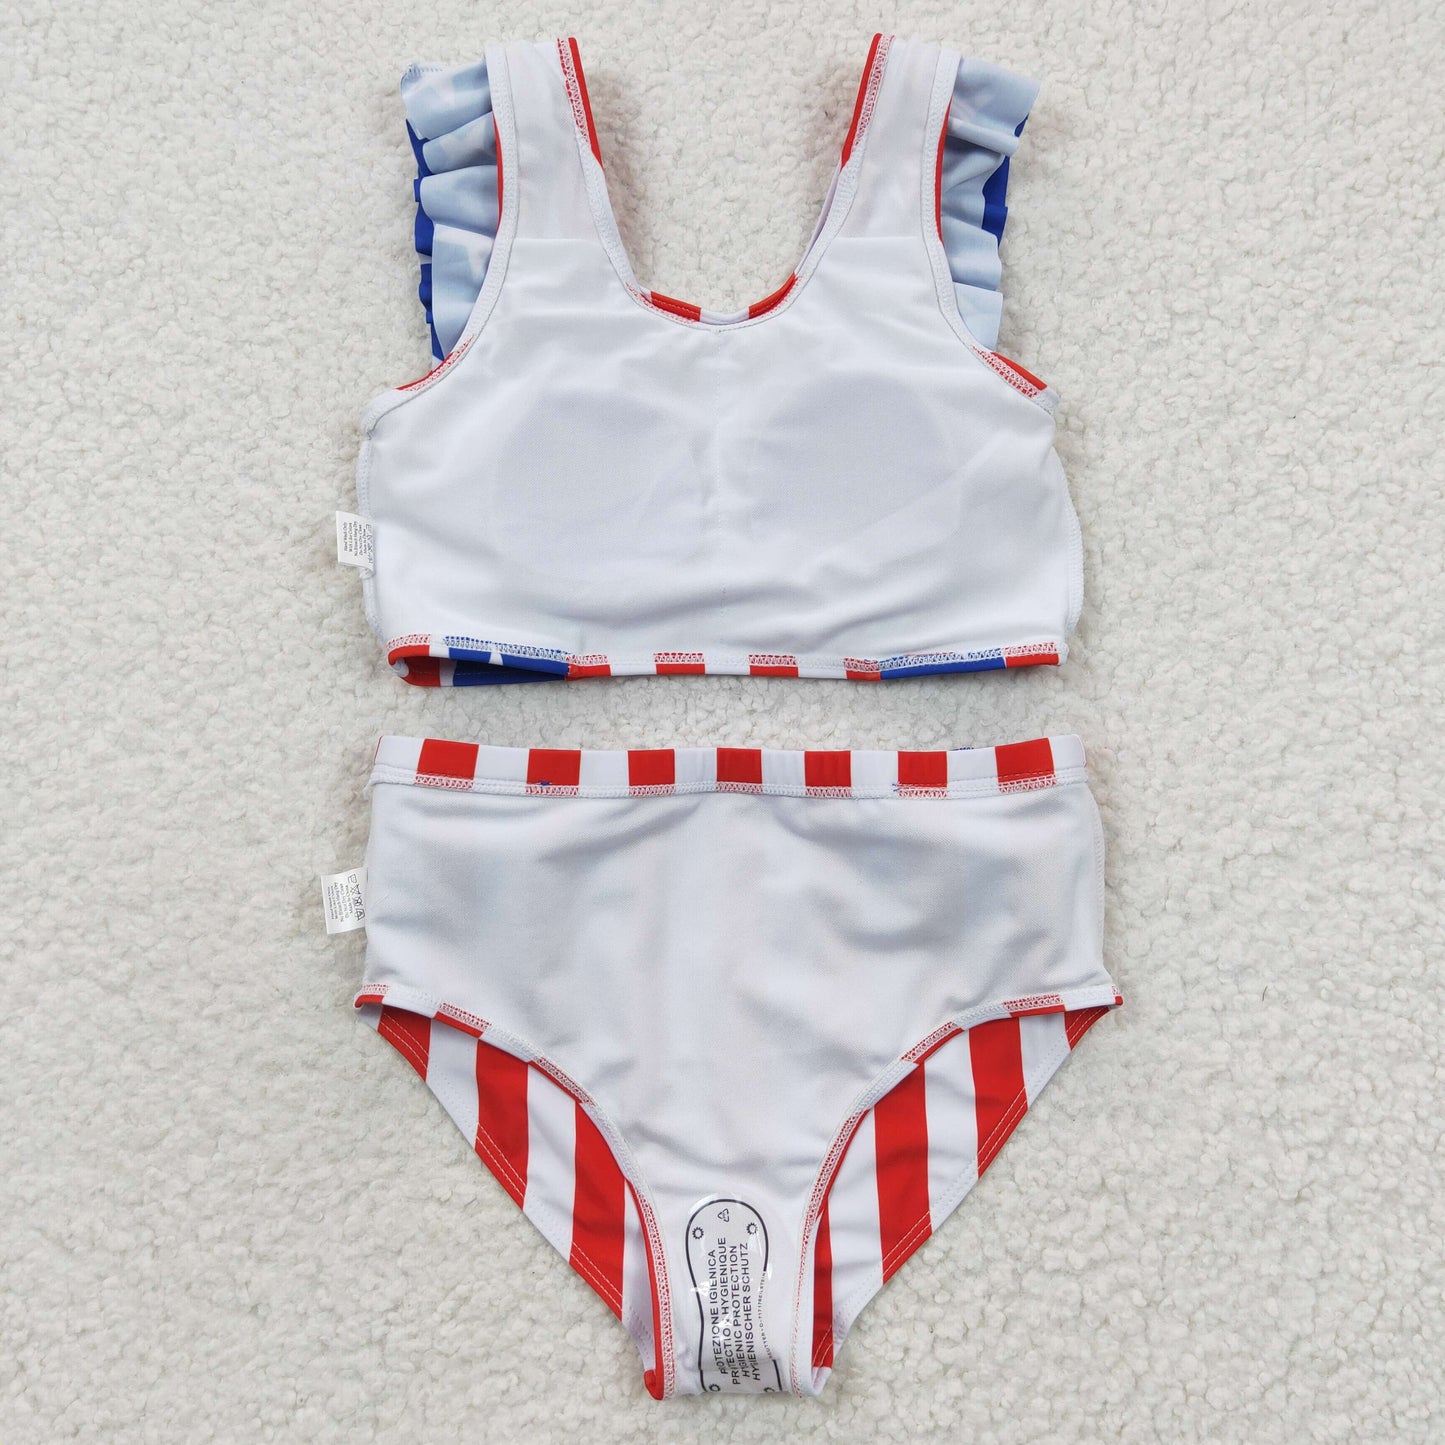 S0090 Girls' National Day Stars Stripes Lace Swimsuit Suit Made Outside